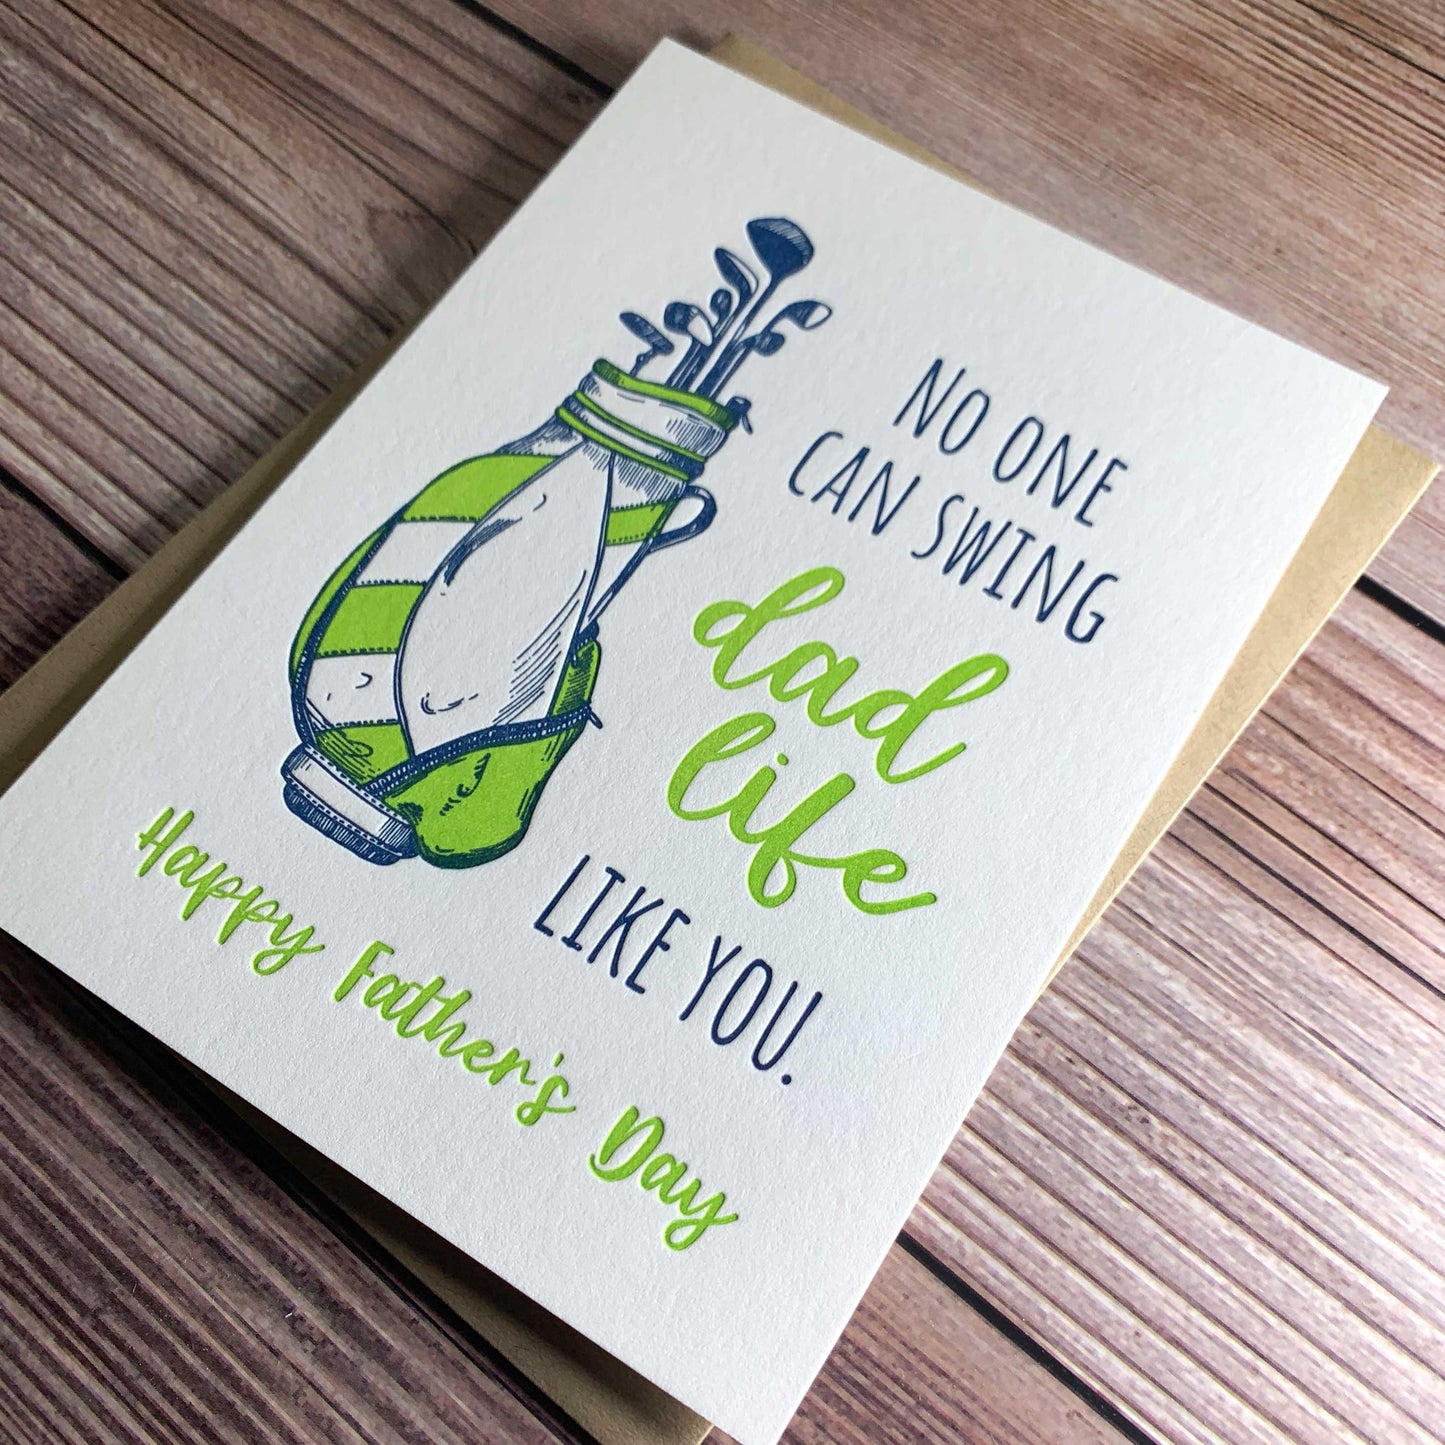 No one can swing dad life like you. Happy Father's Day, Card for golfing dads, bag of golf clubs, Letterpress printed, view shows letterpress impression, includes envelope